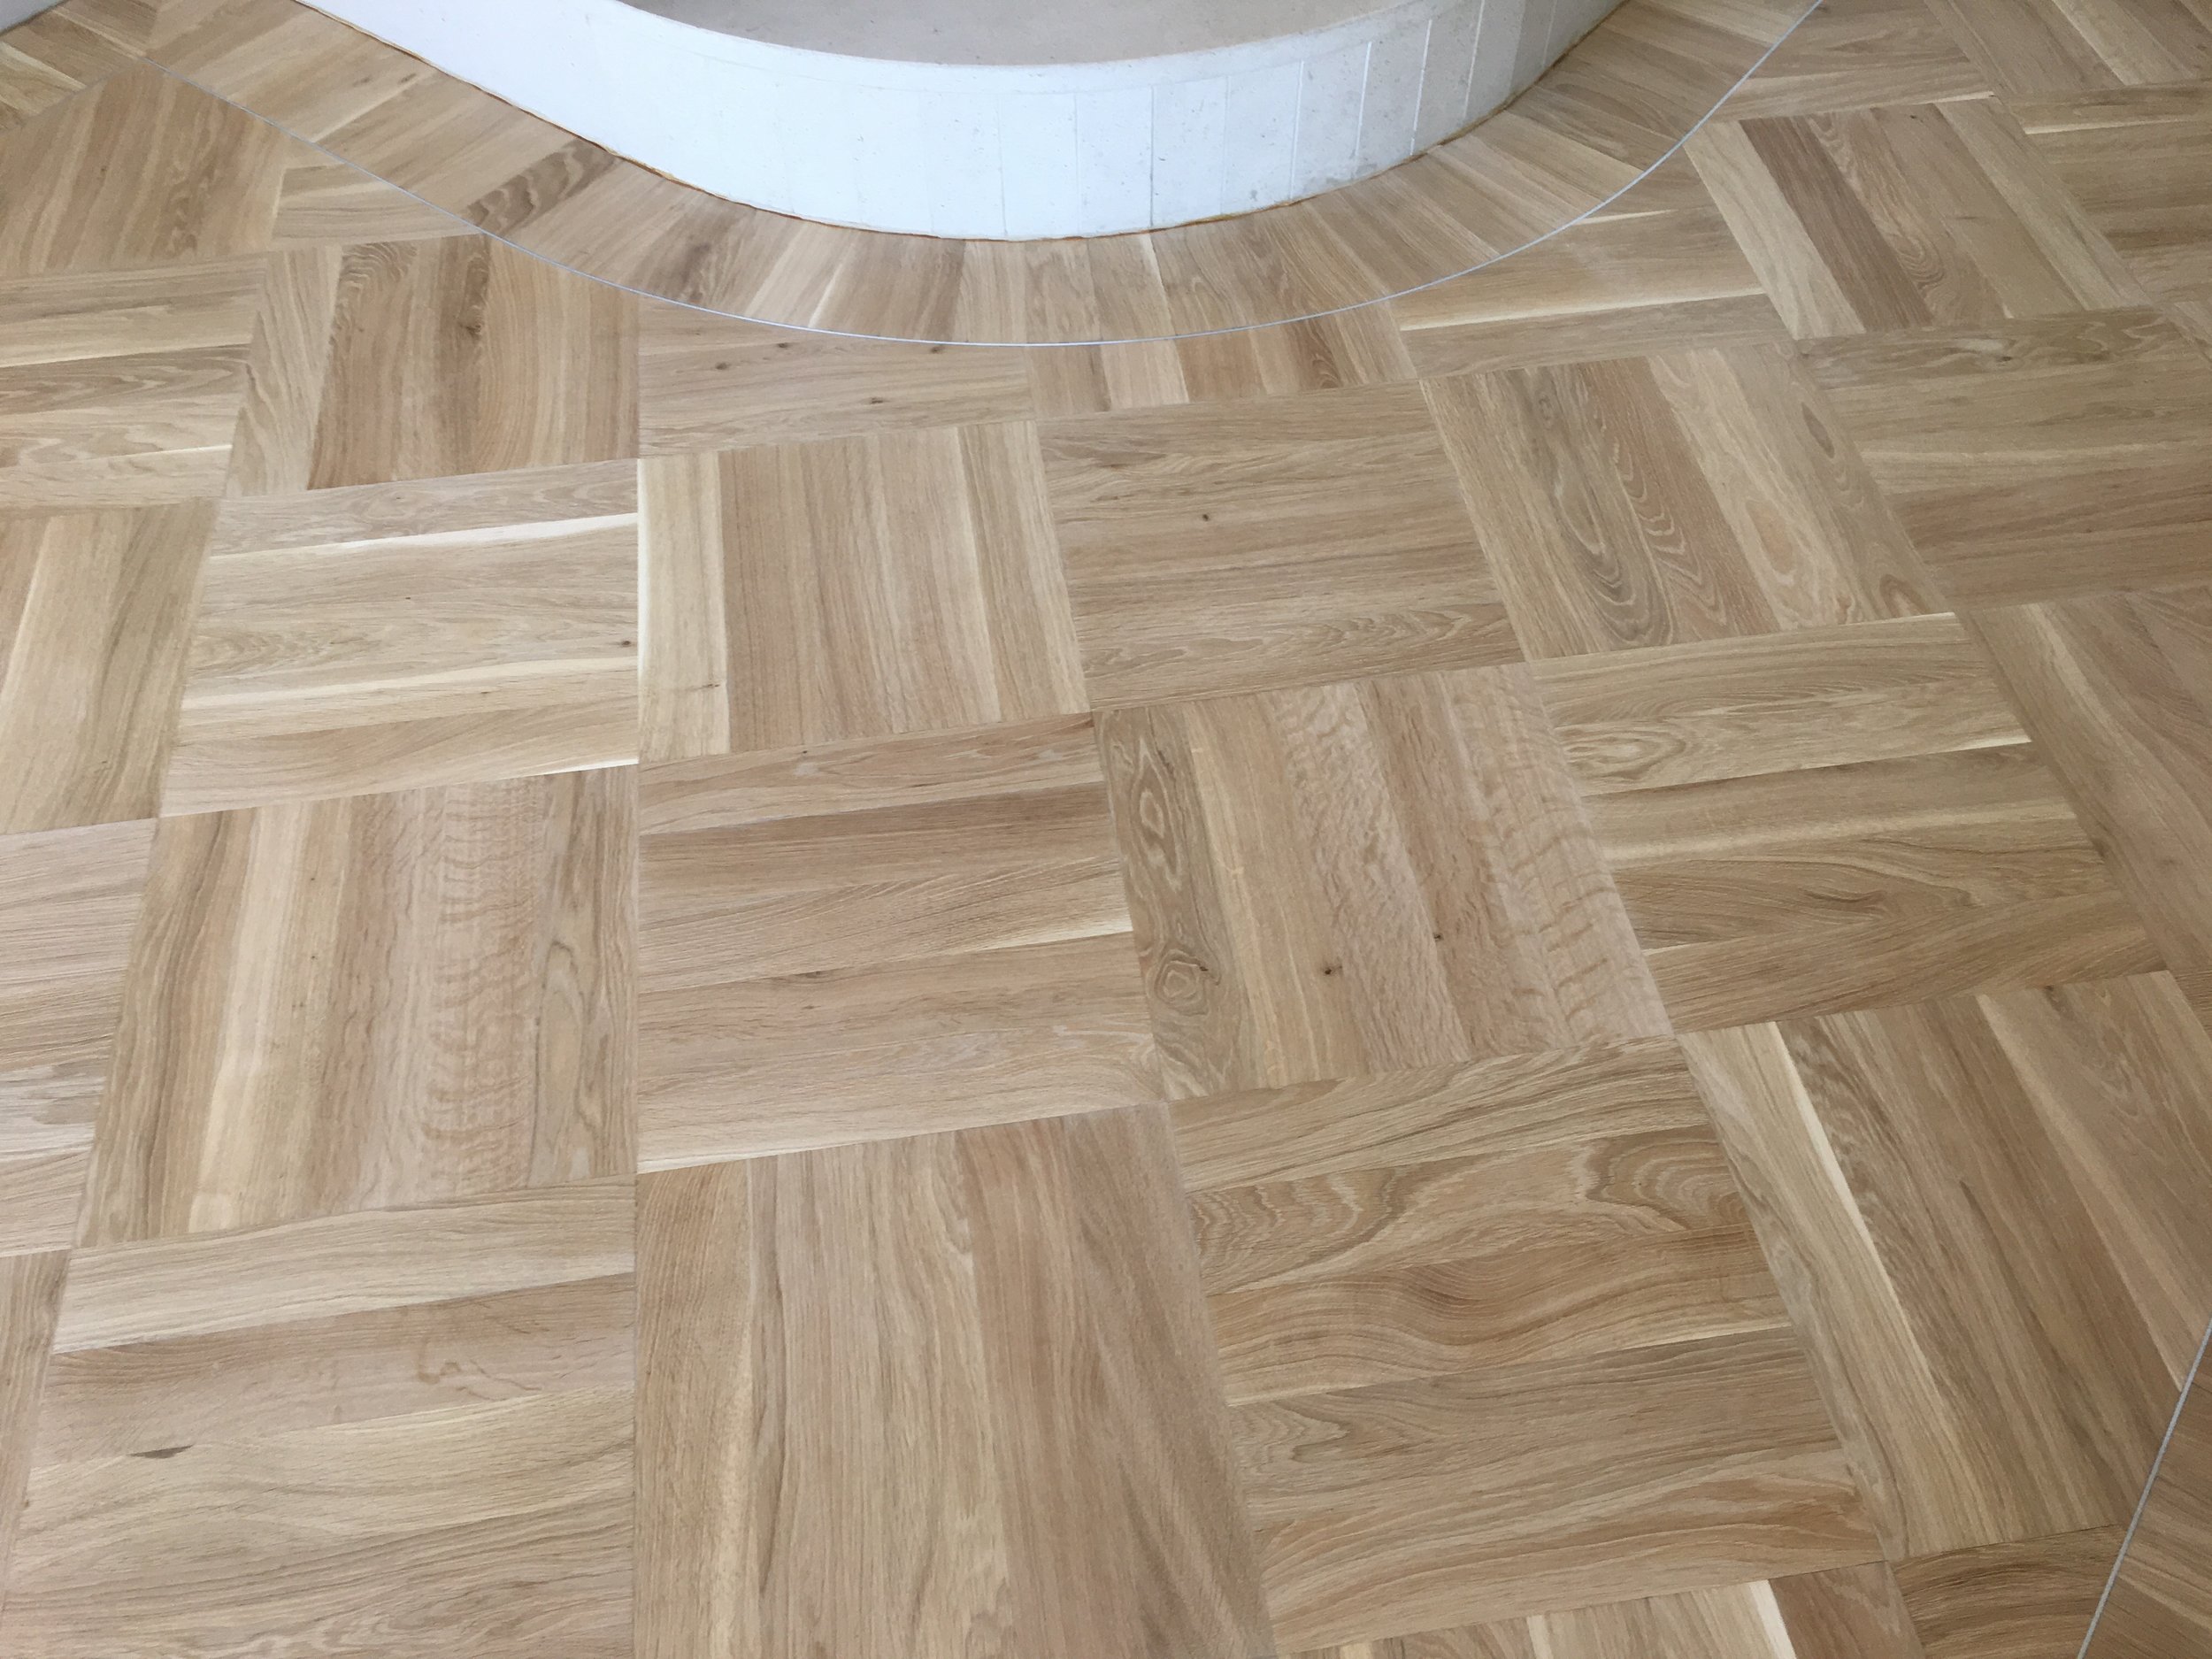  White Oak parquet laid in square on square with a solider course border and aluminium inlay 